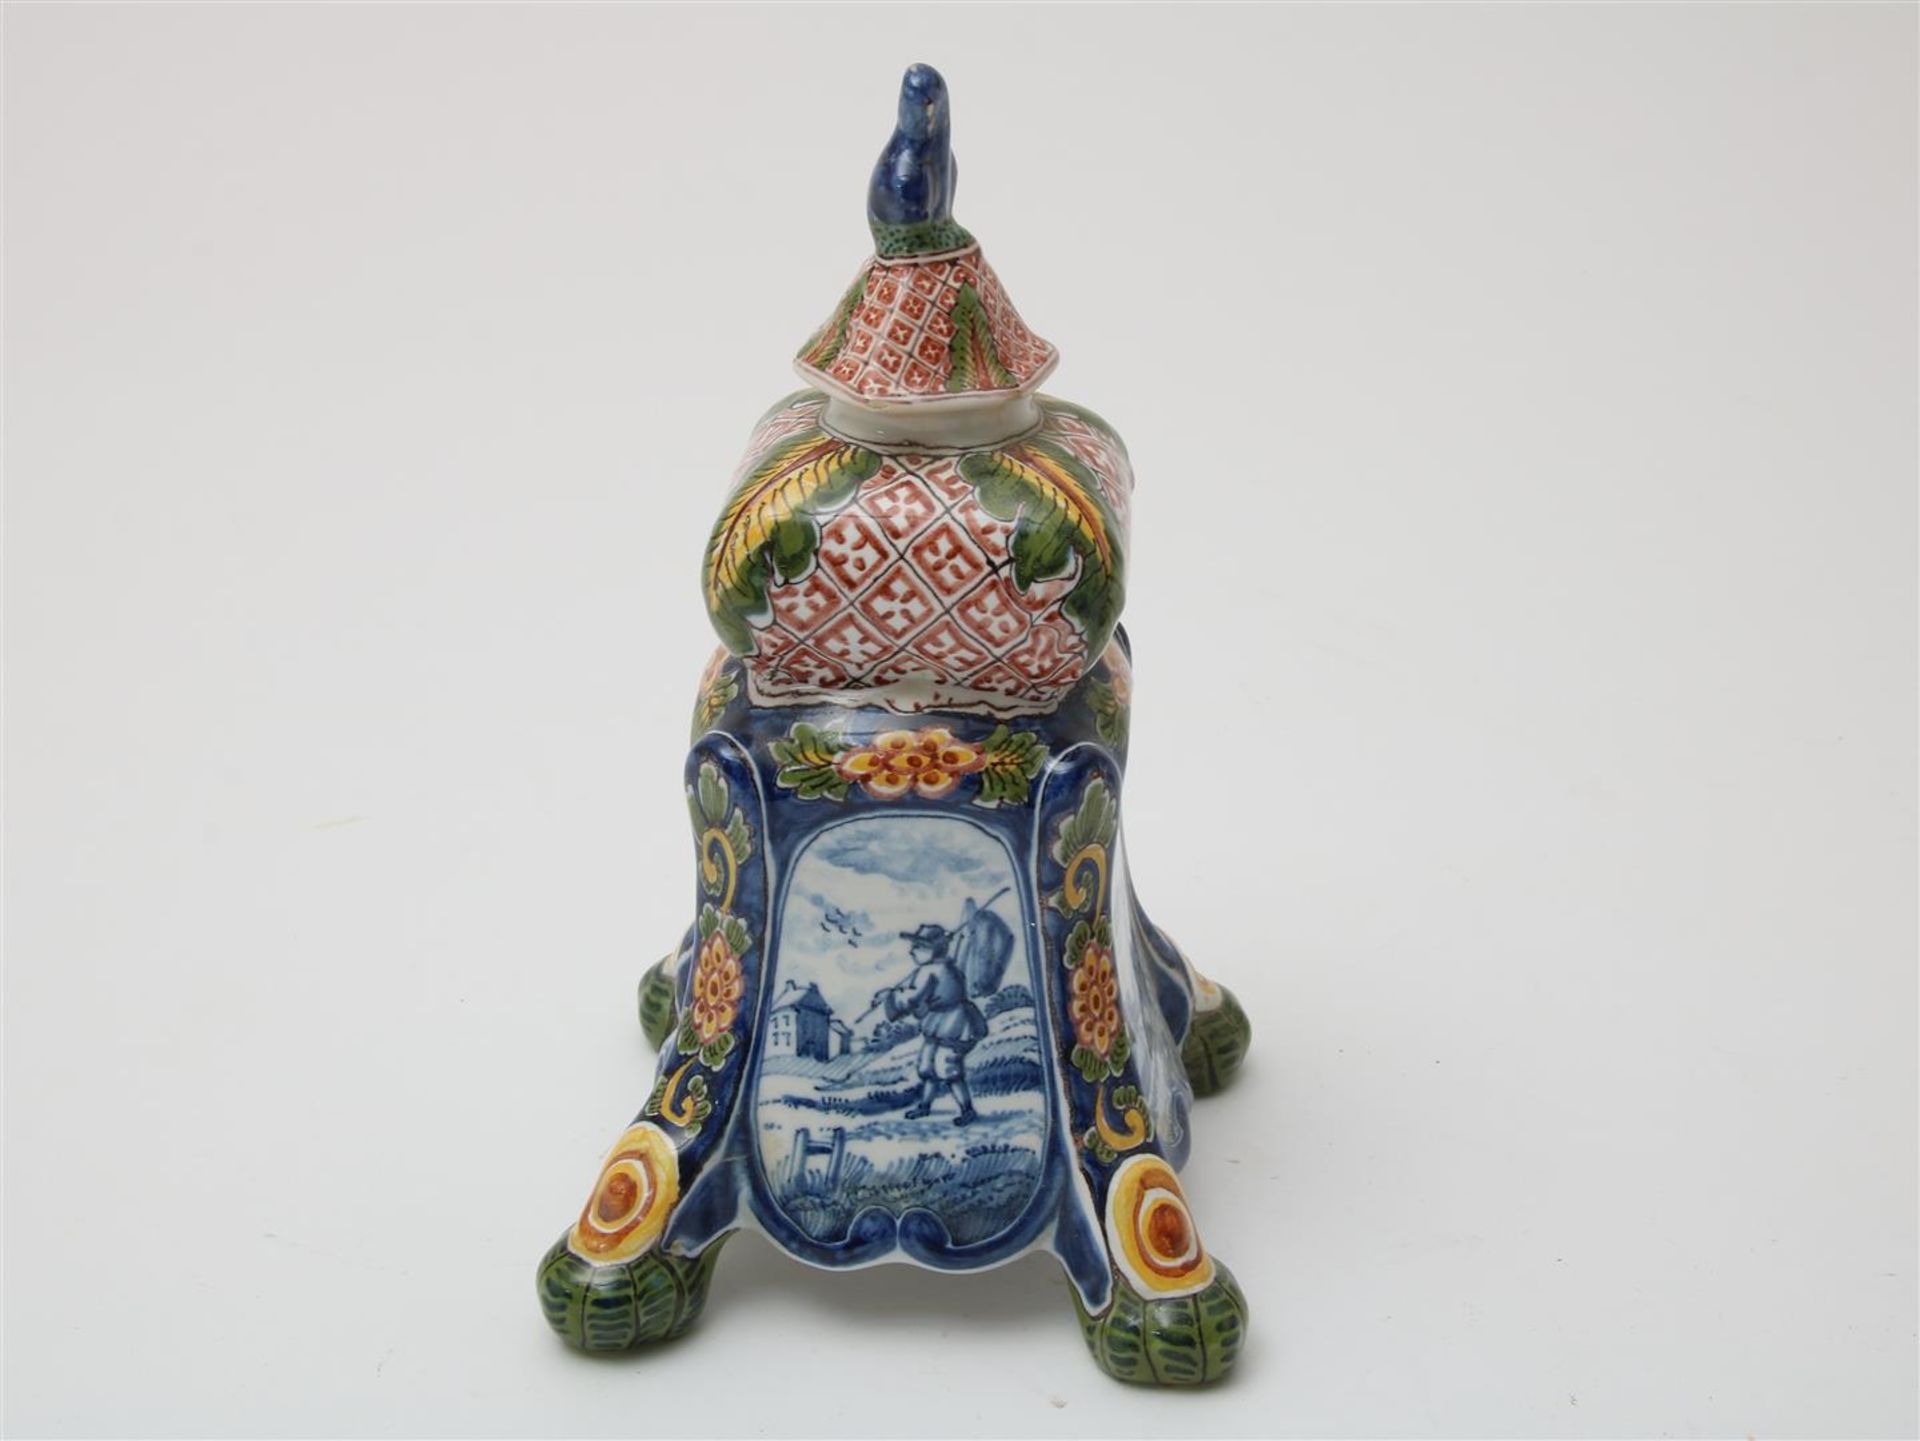 Lot of a polychrome earthenware candlestick, h. 21 cm., polychrome earthenware tea caddy, h. 13 - Image 3 of 9